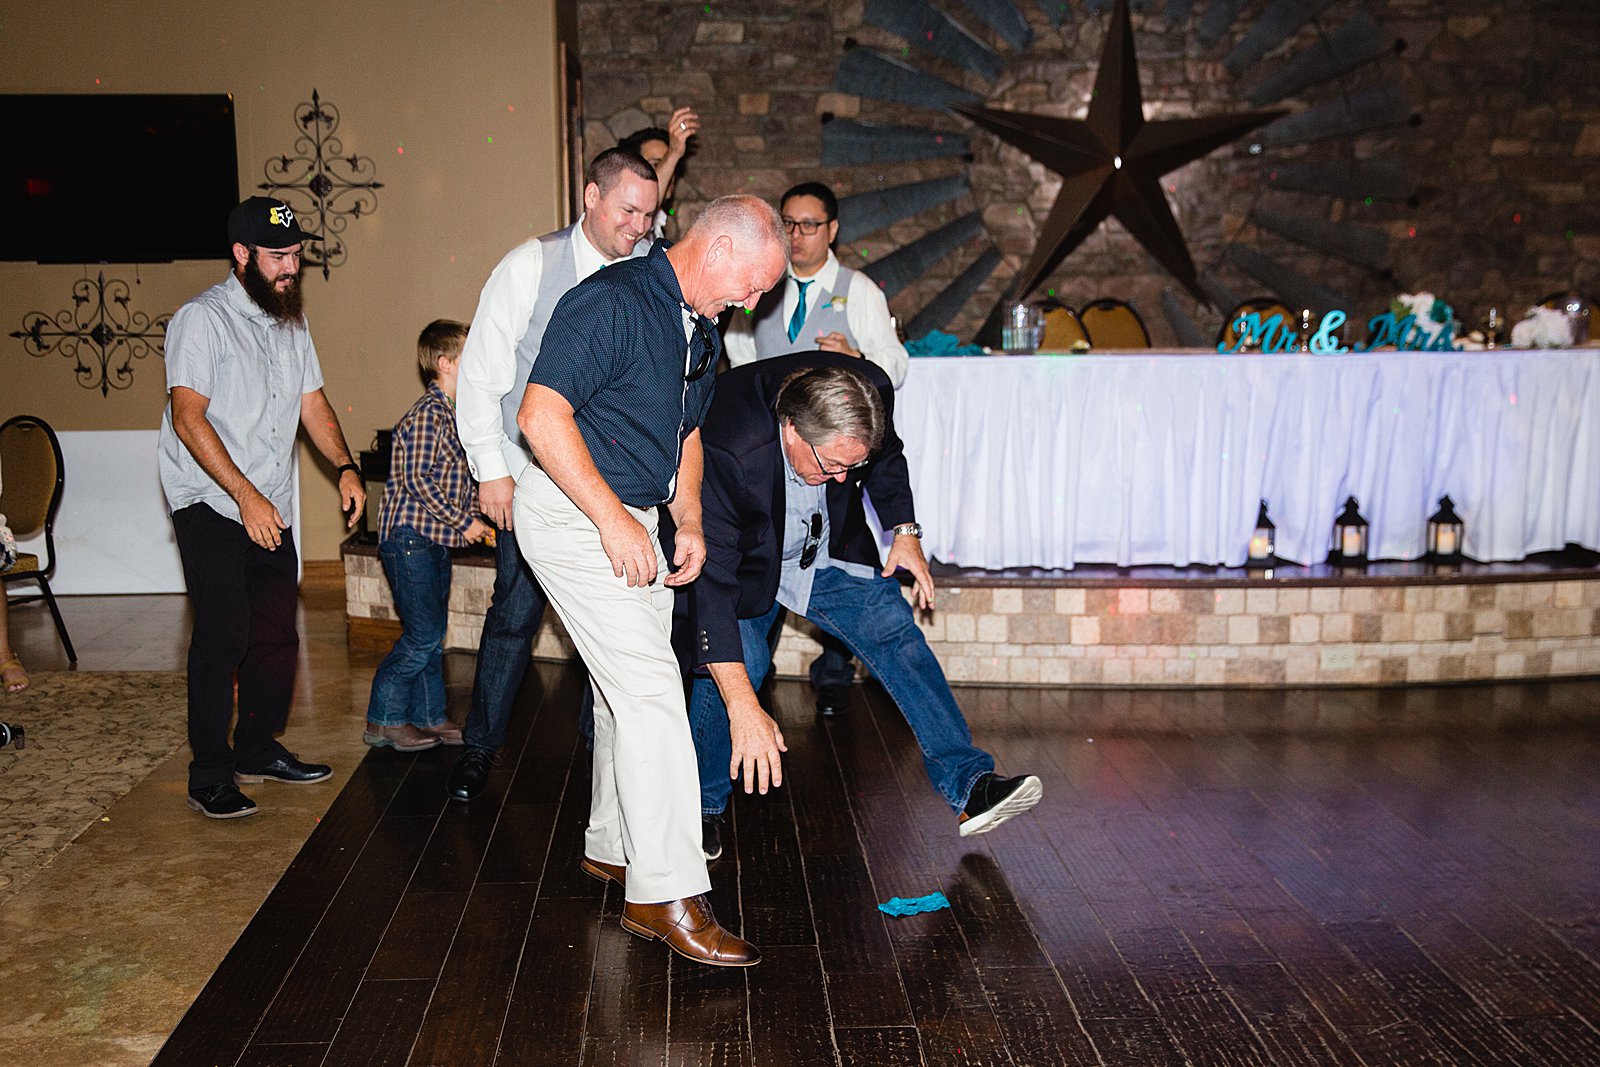 Garter toss at The Windmill House wedding reception by Chino Valley wedding photographer PMA Photography.